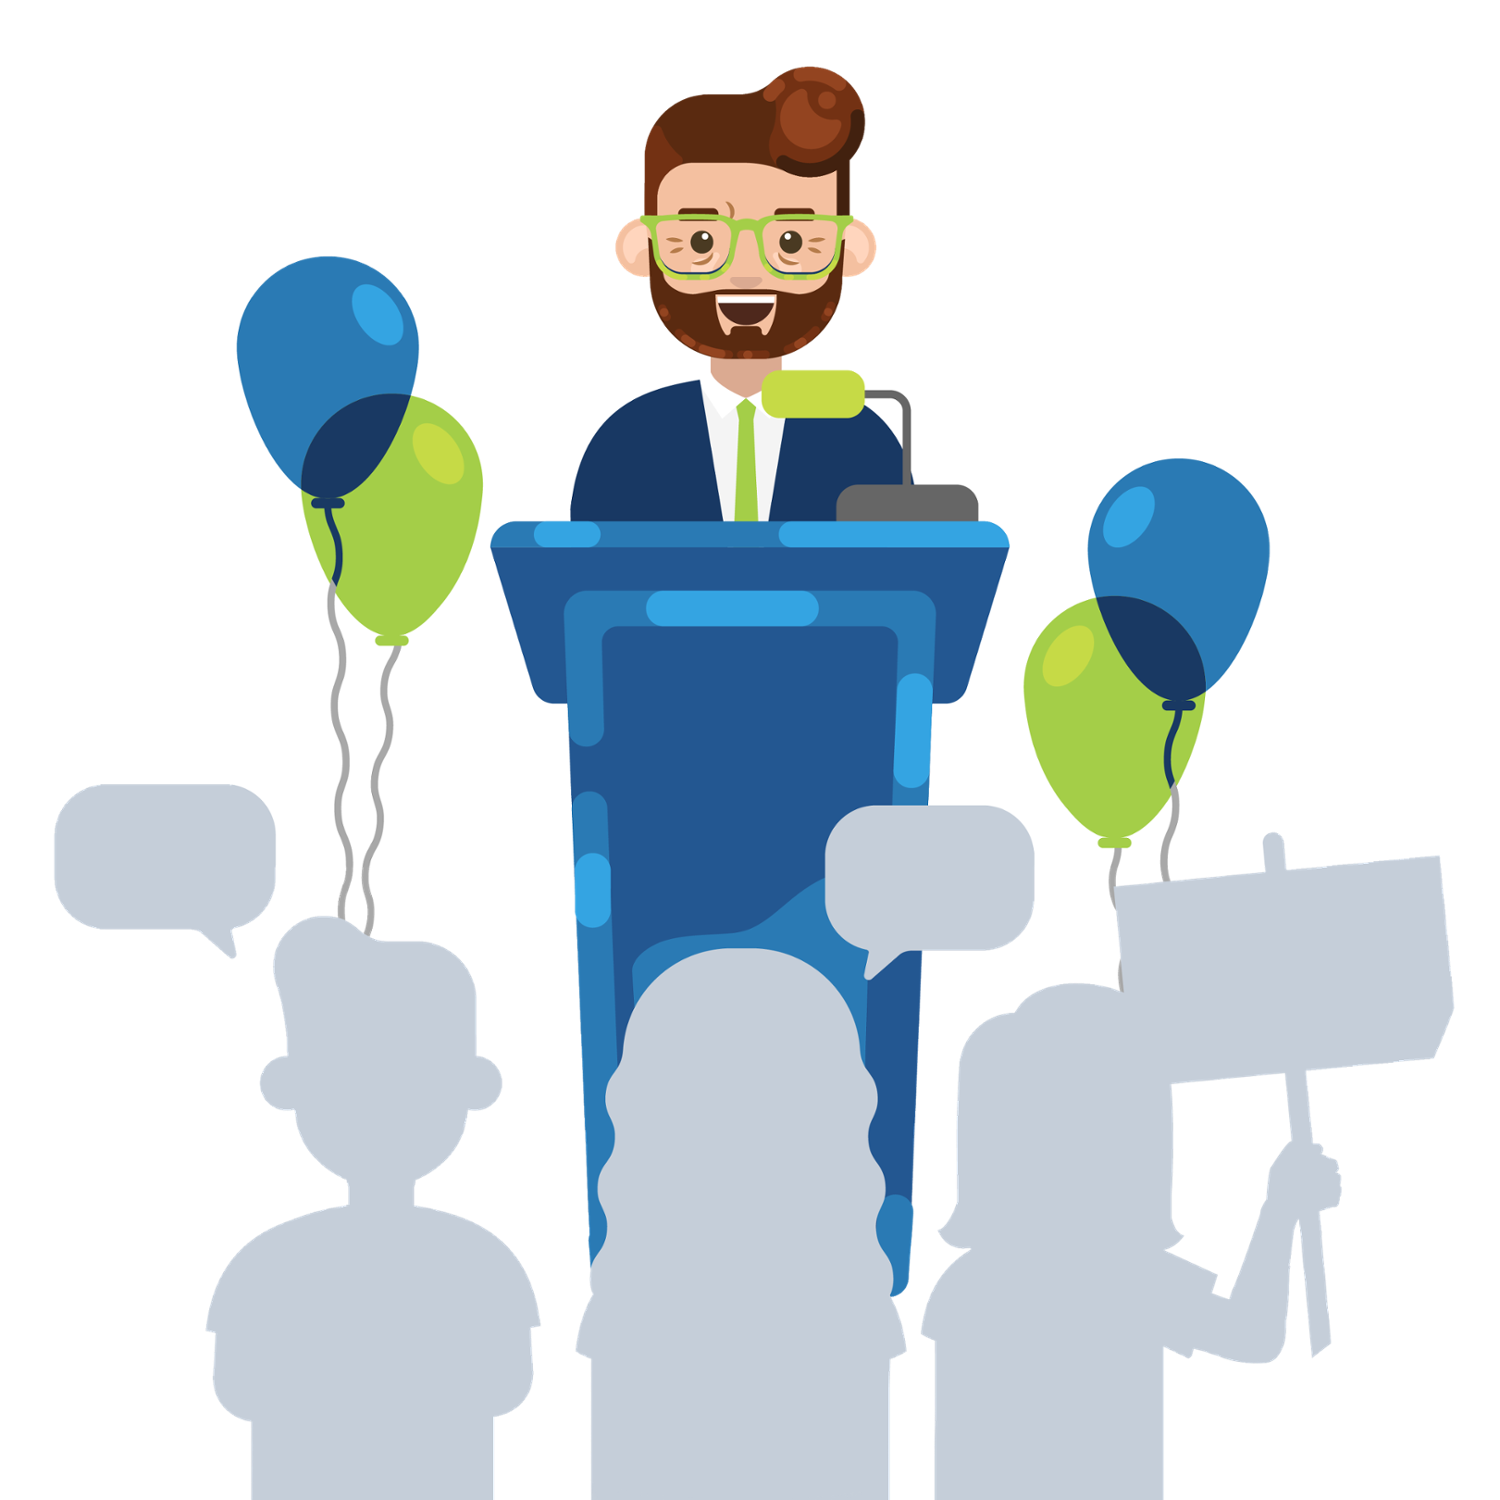 Man standing at a podium with balloons and an audience in front of him